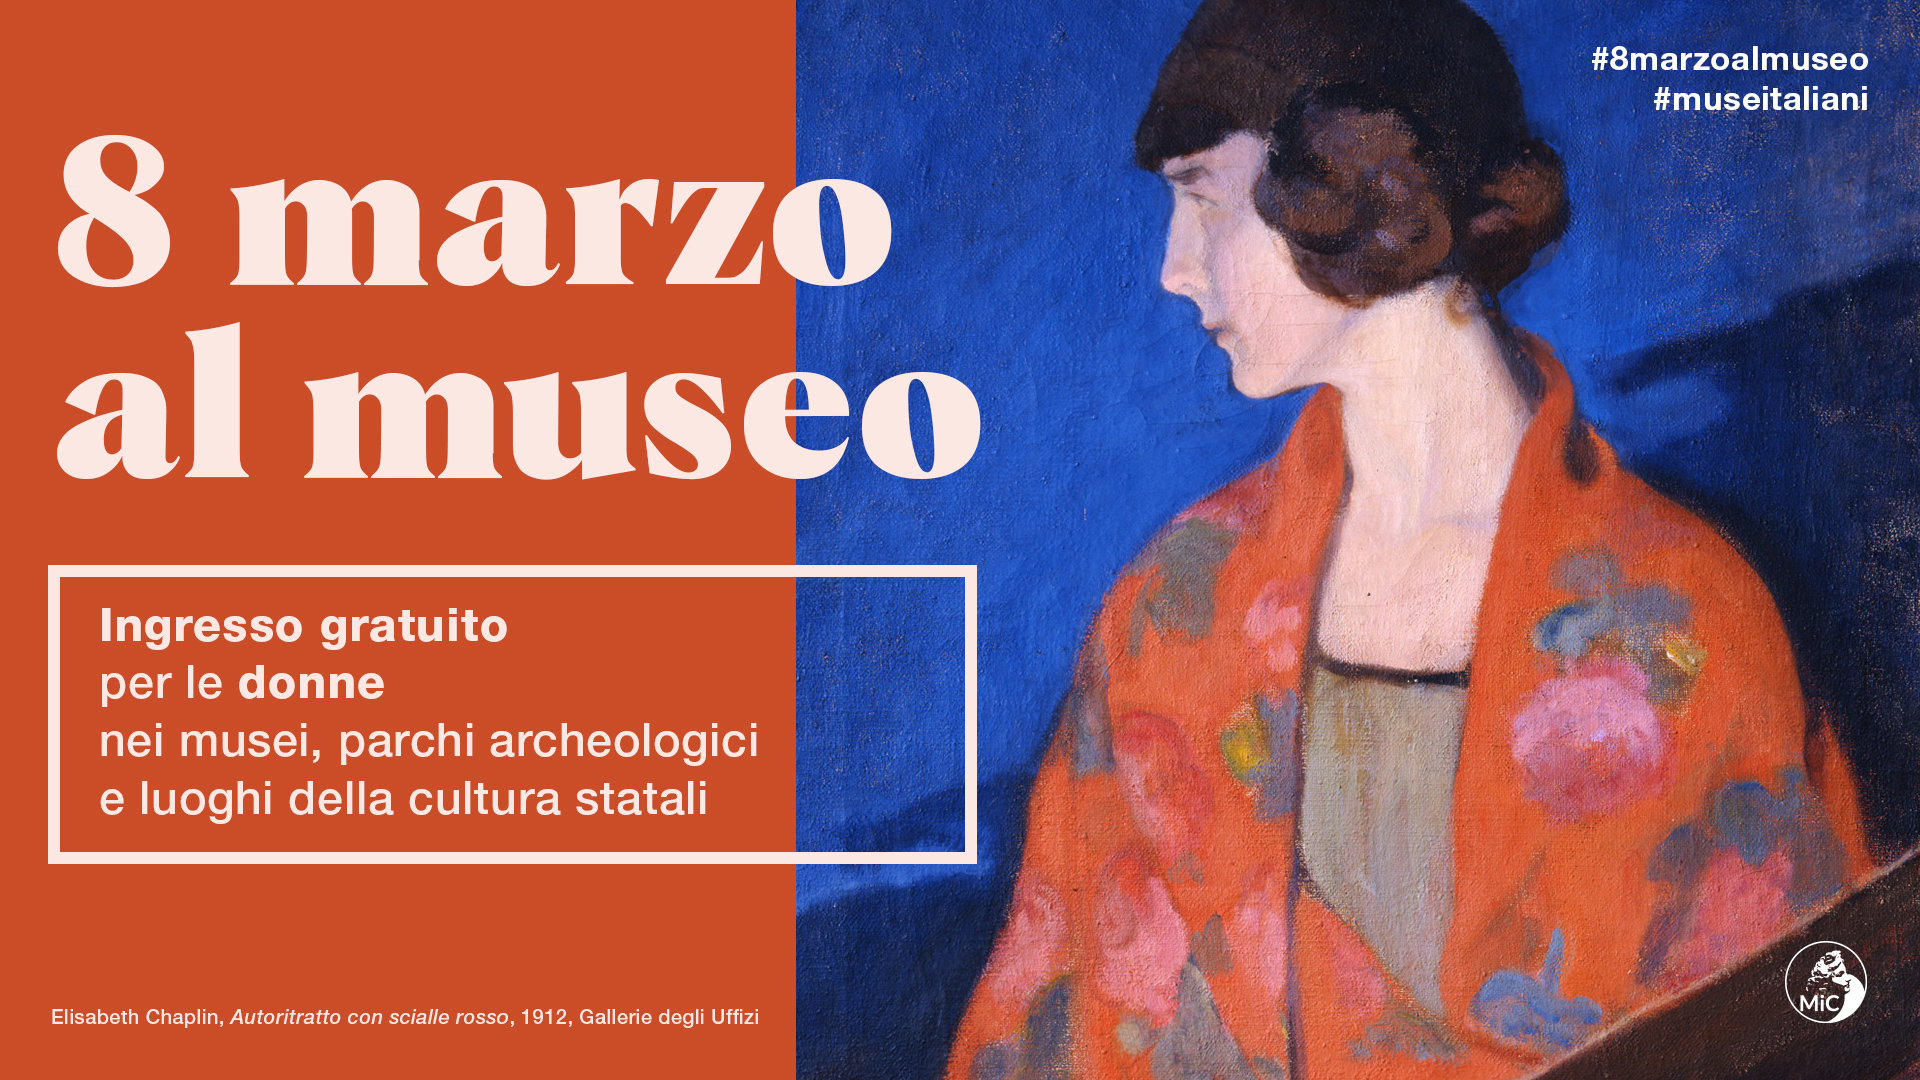 8 marzo museo donne